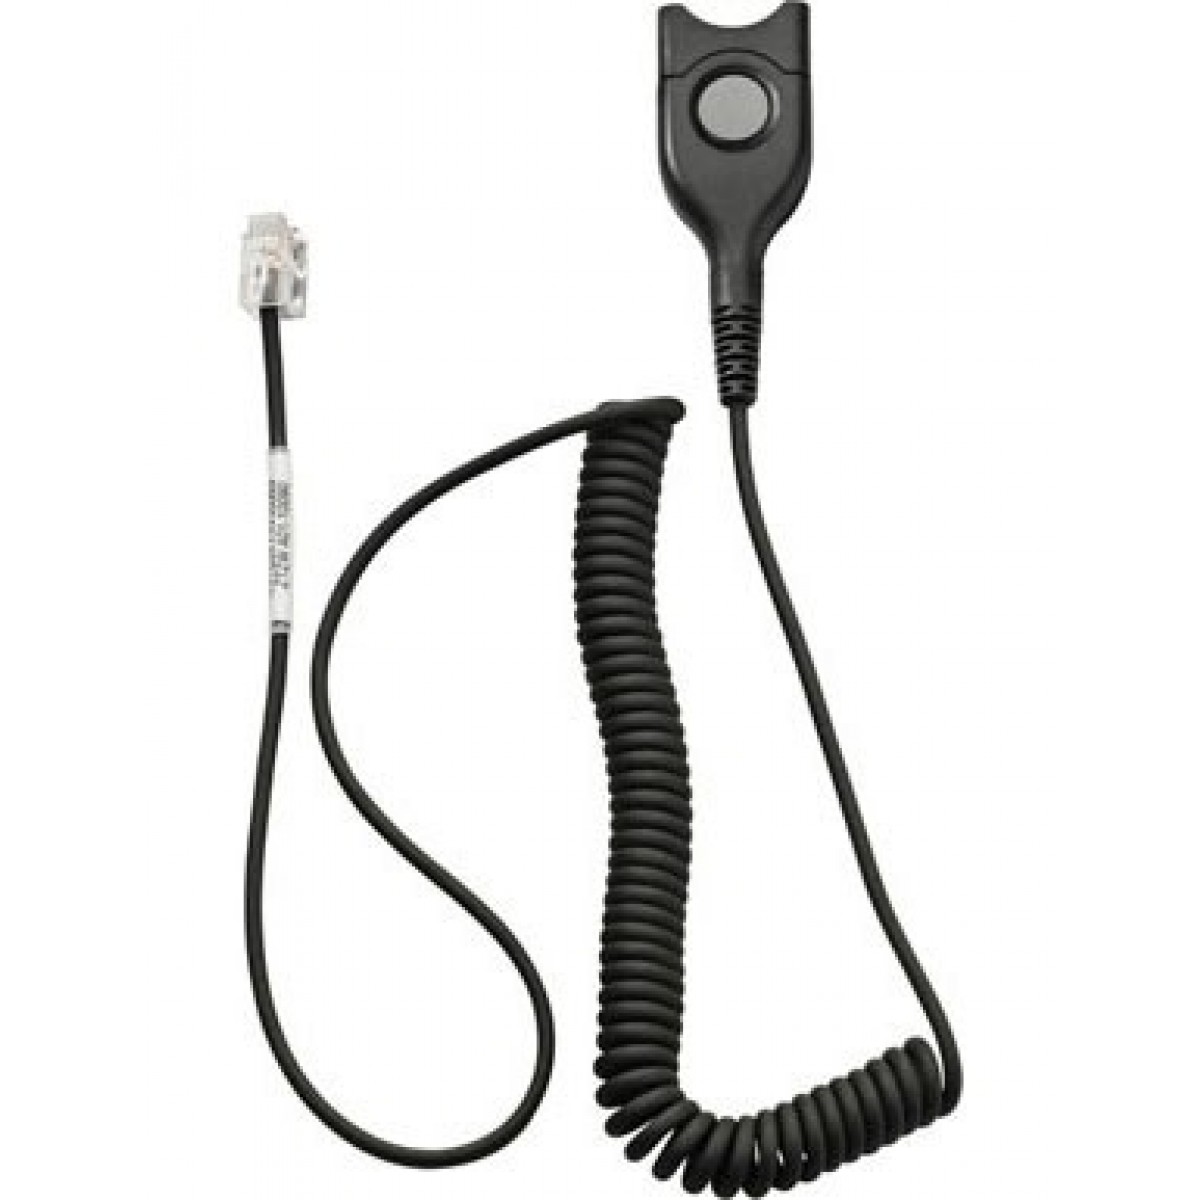 EPOS  Sennheiser Standard Bottom cable EasyDisconnect to Modular Plug  Coiled cable  code 01 for direct connection to most phones.